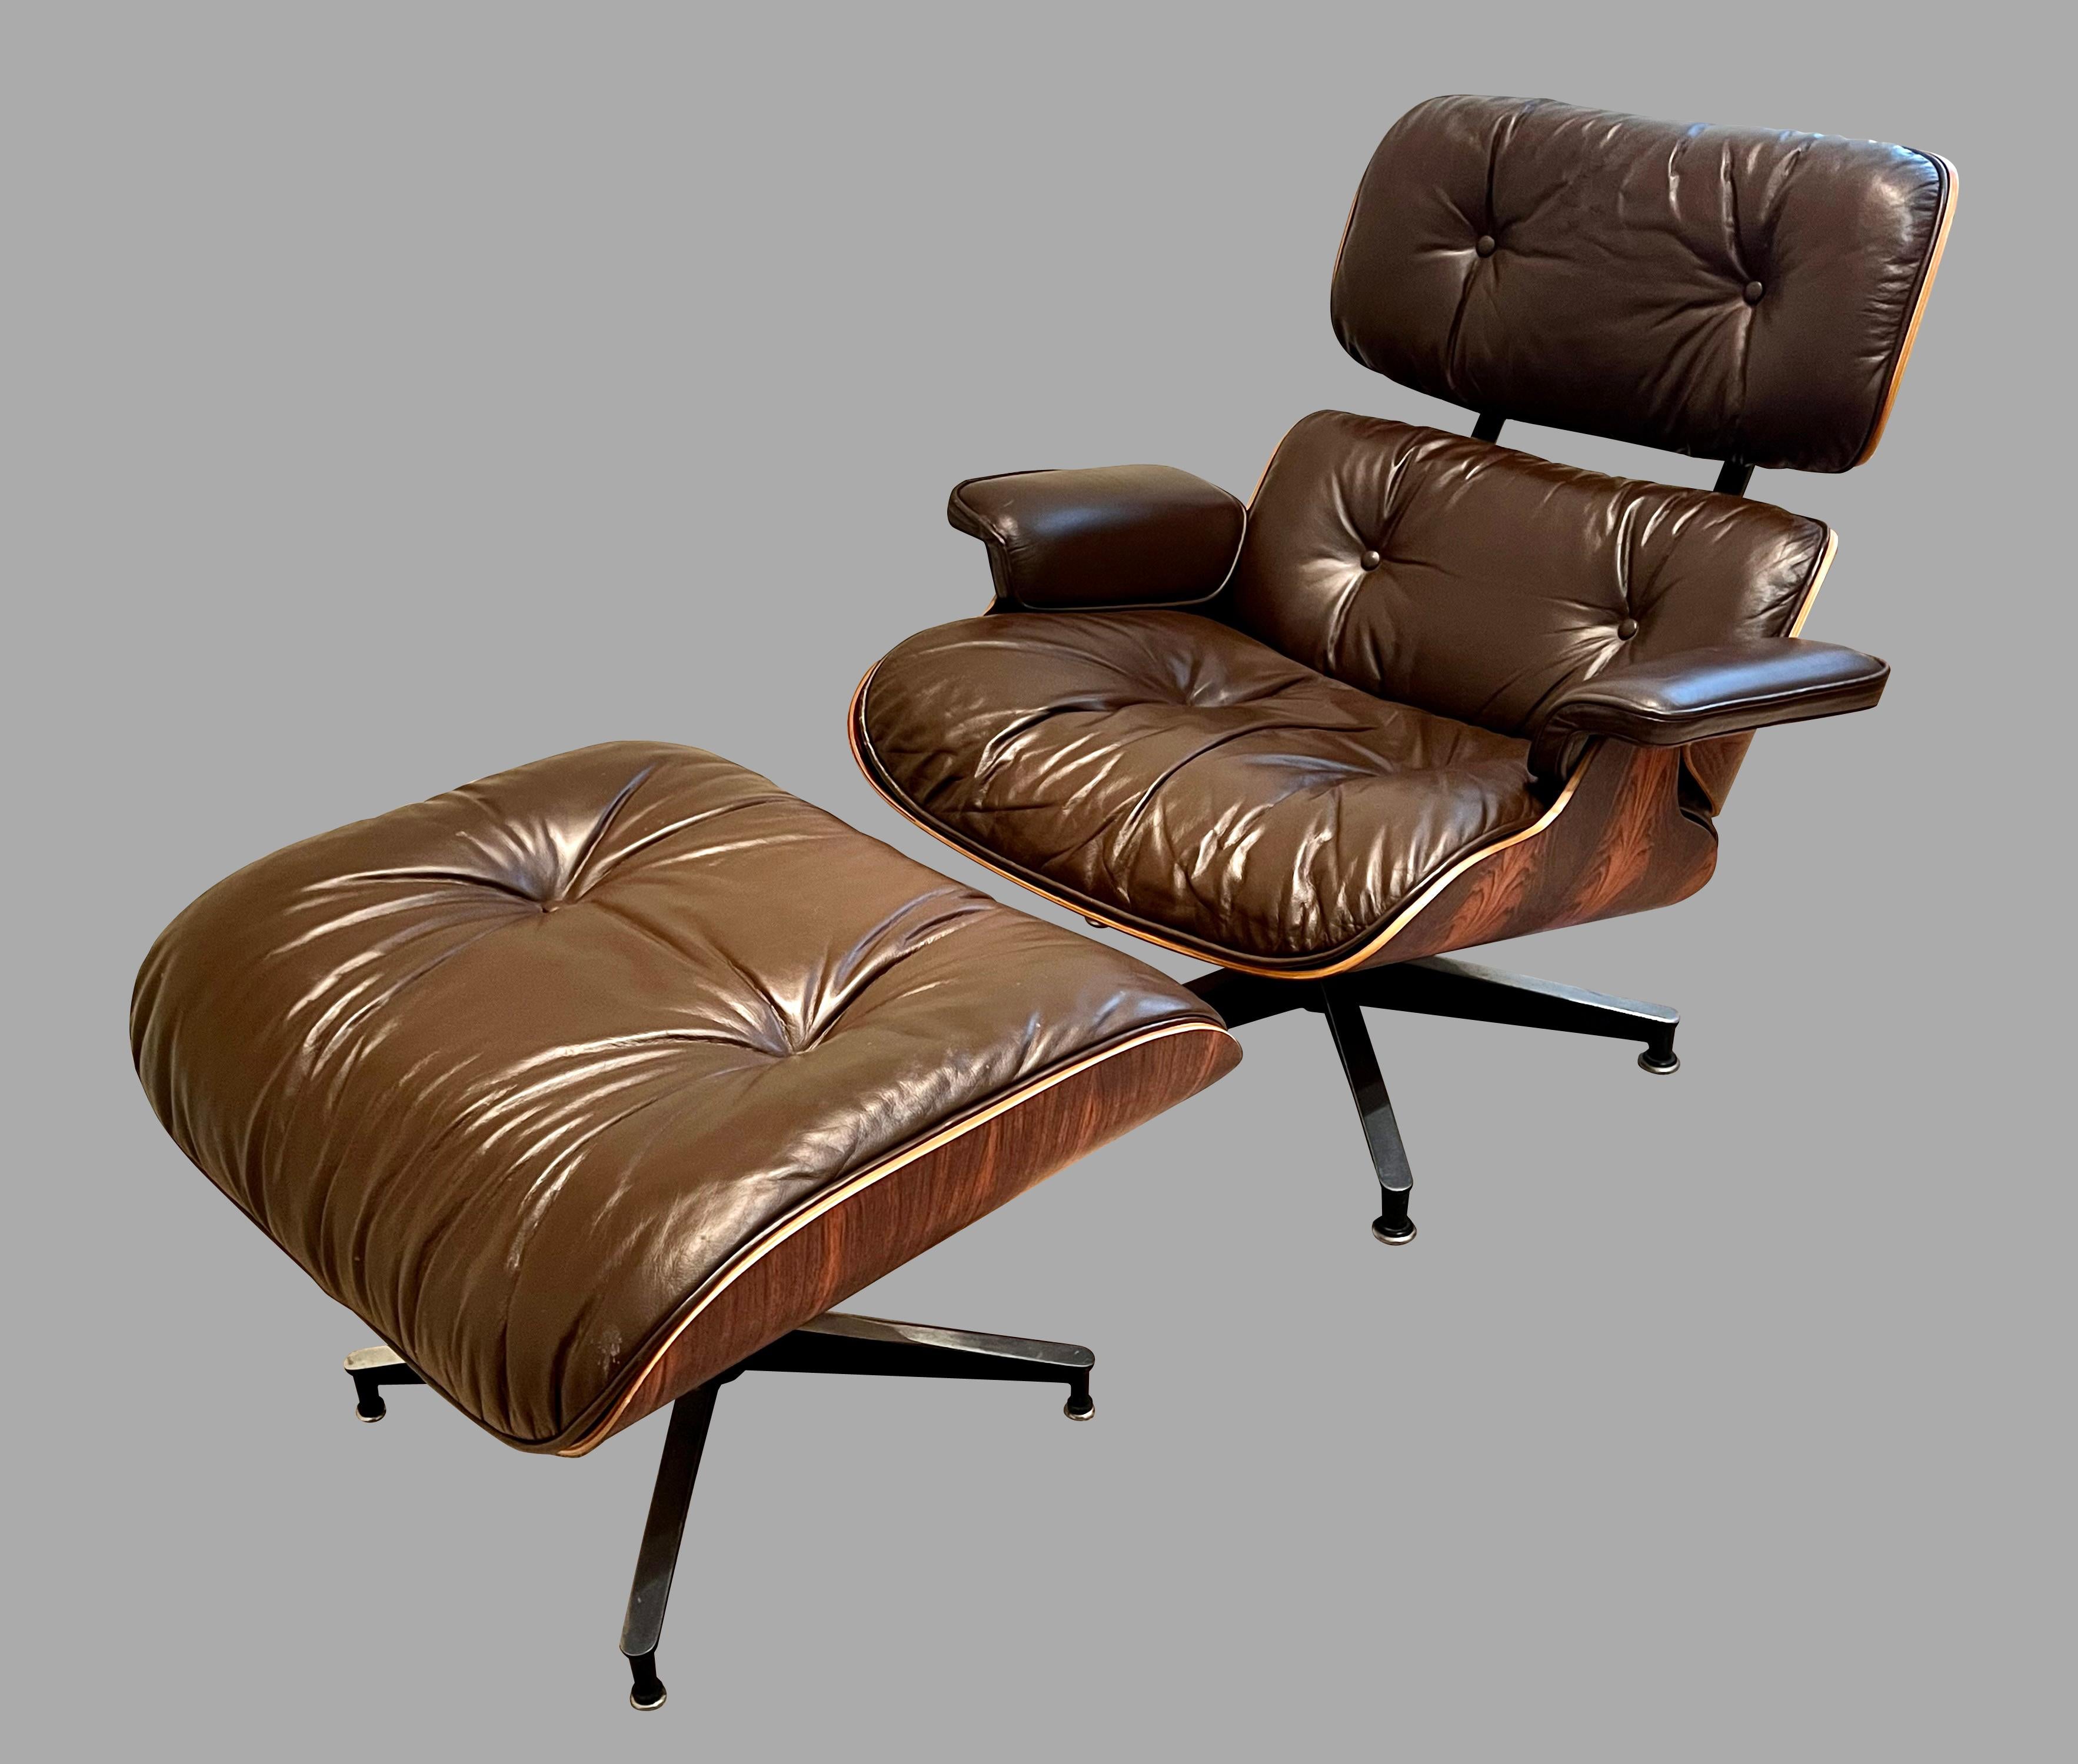 A fully labeled example of the classic Charles Eames brown leather and laminated rosewood model 670 lounge chair with matching model 671 ottoman. The iconic Eames 670 chair has been in continual production since the late 1950's. This chair and